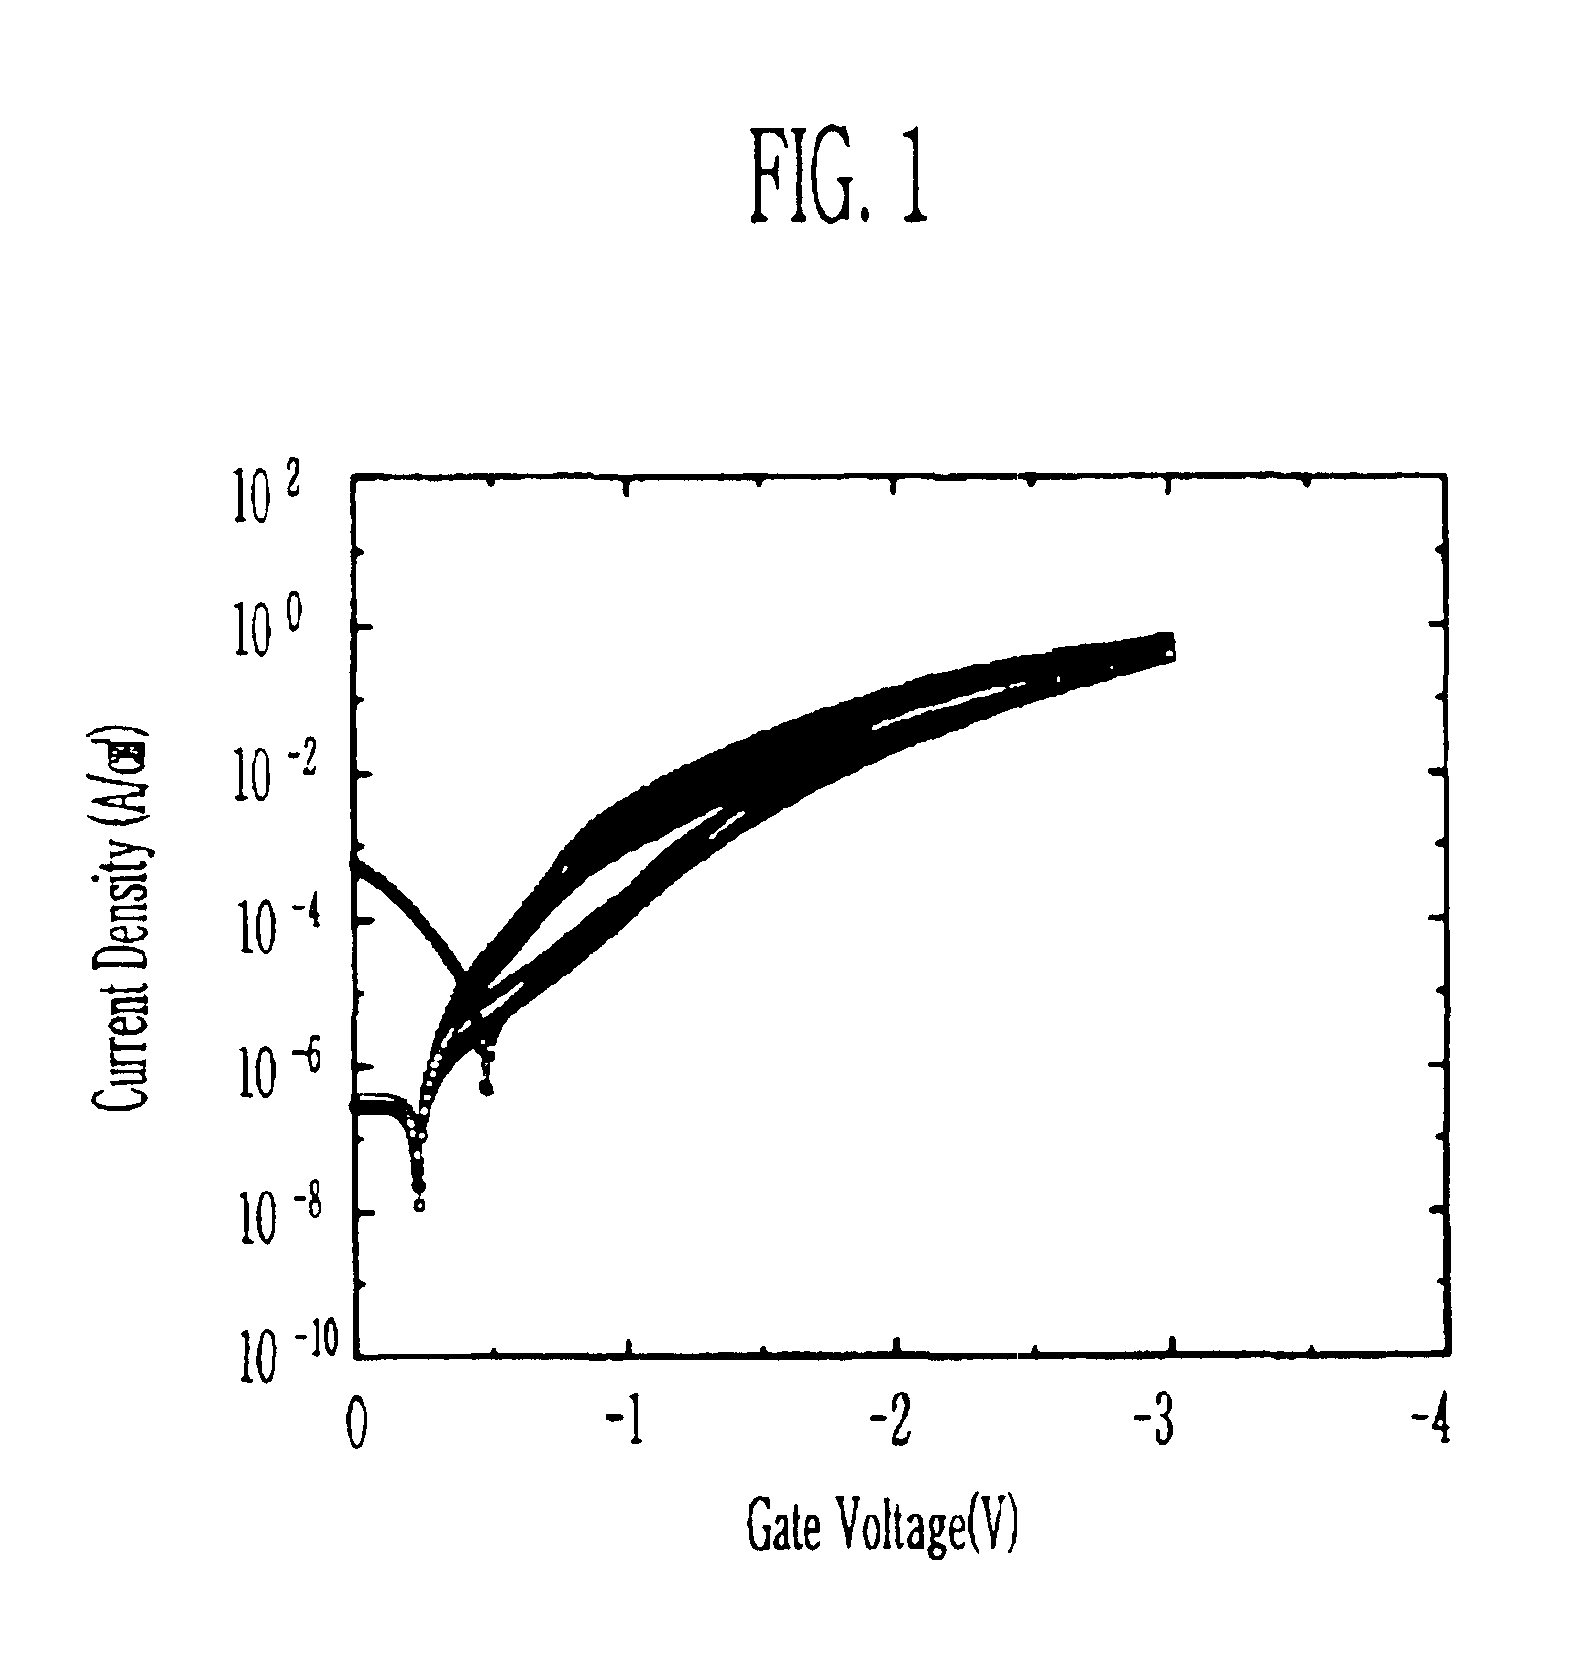 Method of manufacturing semiconductor devices